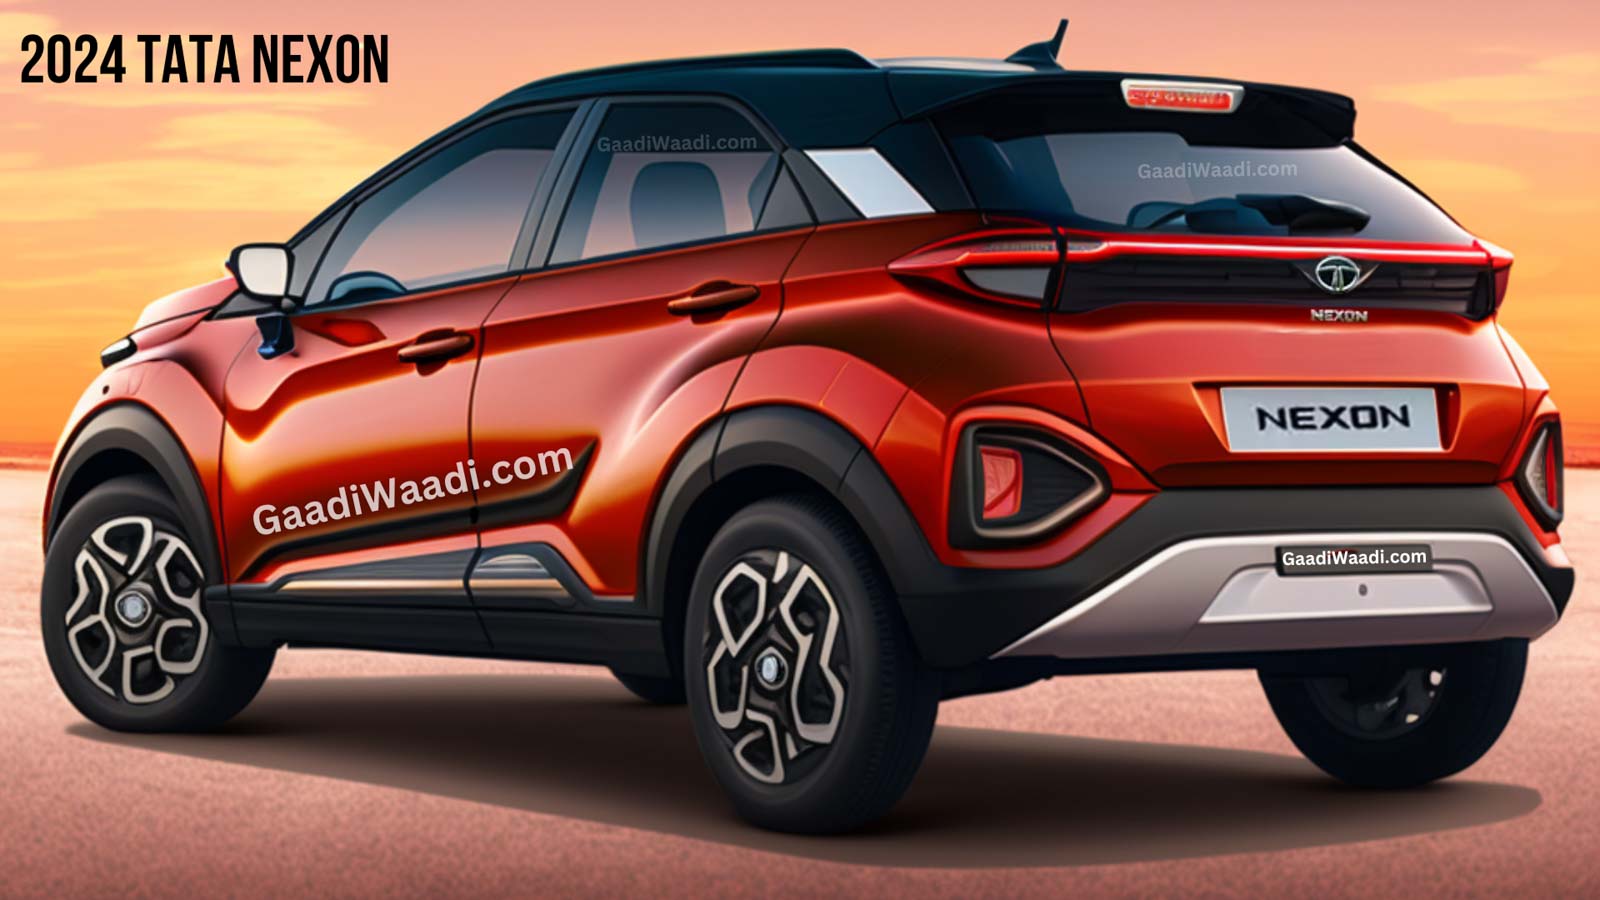 2023 Tata Nexon Facelift Likely Launch Within The Next 3 Months